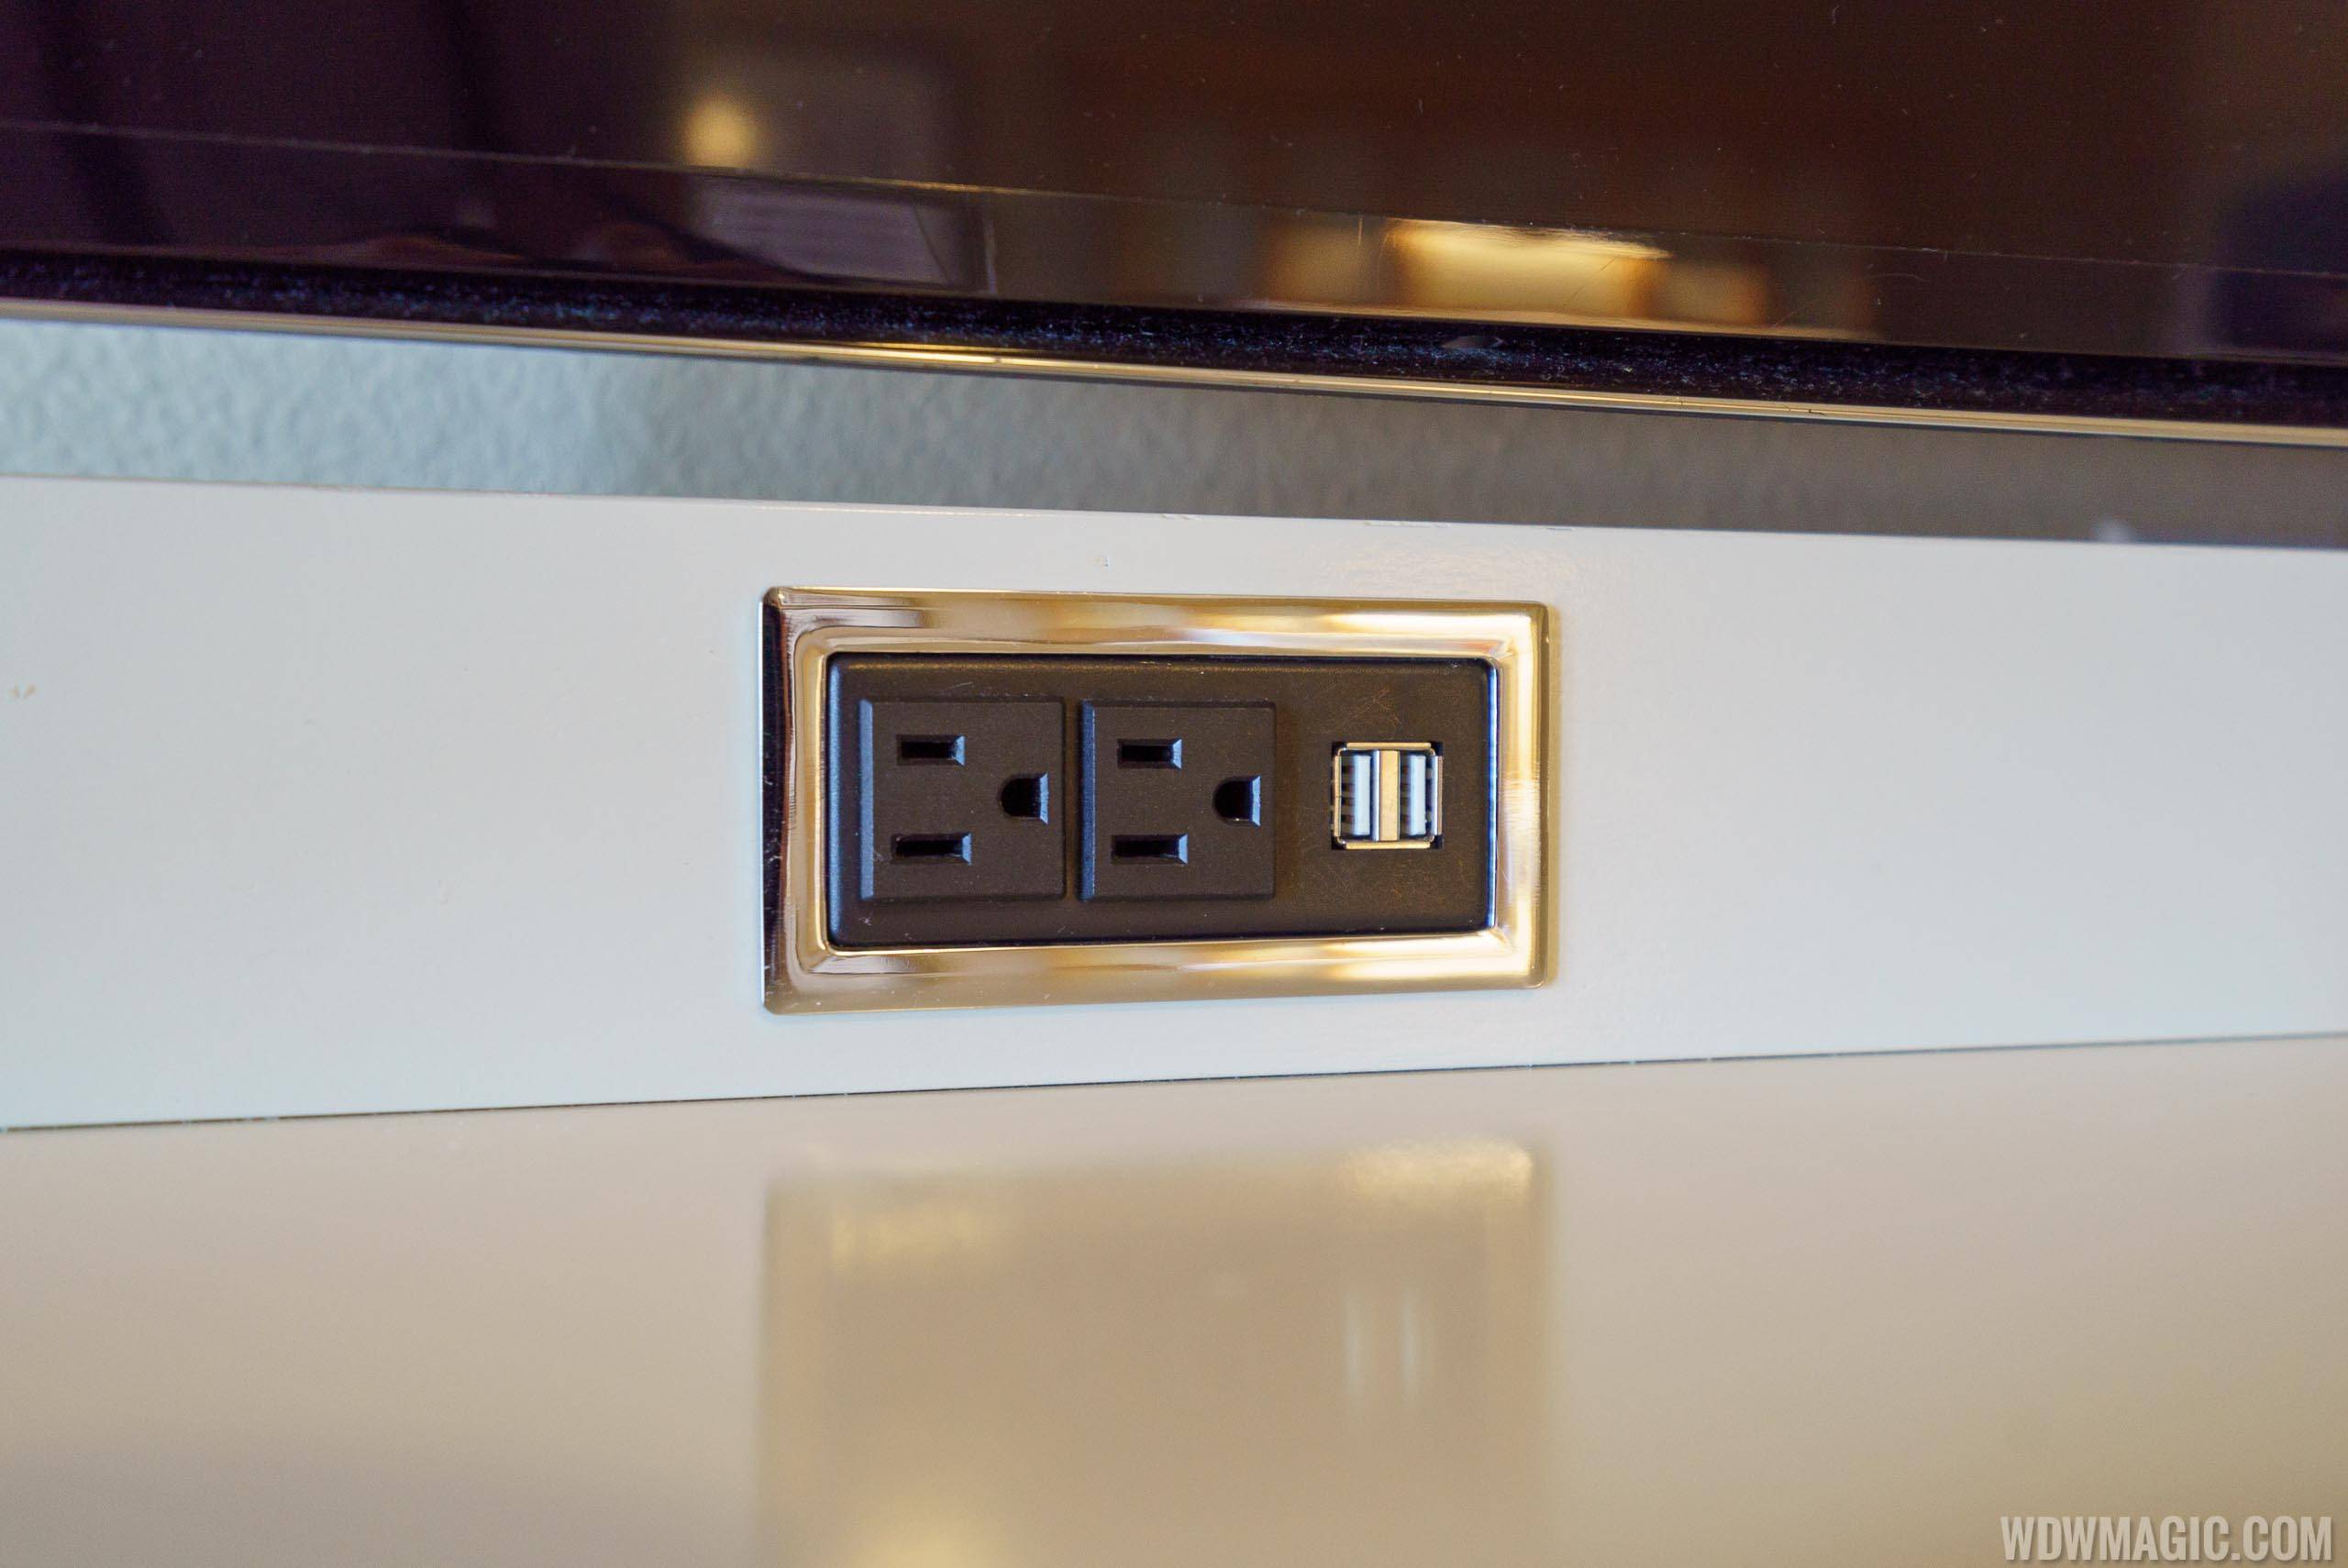 USB outlets as soon in Vero Beach Resort